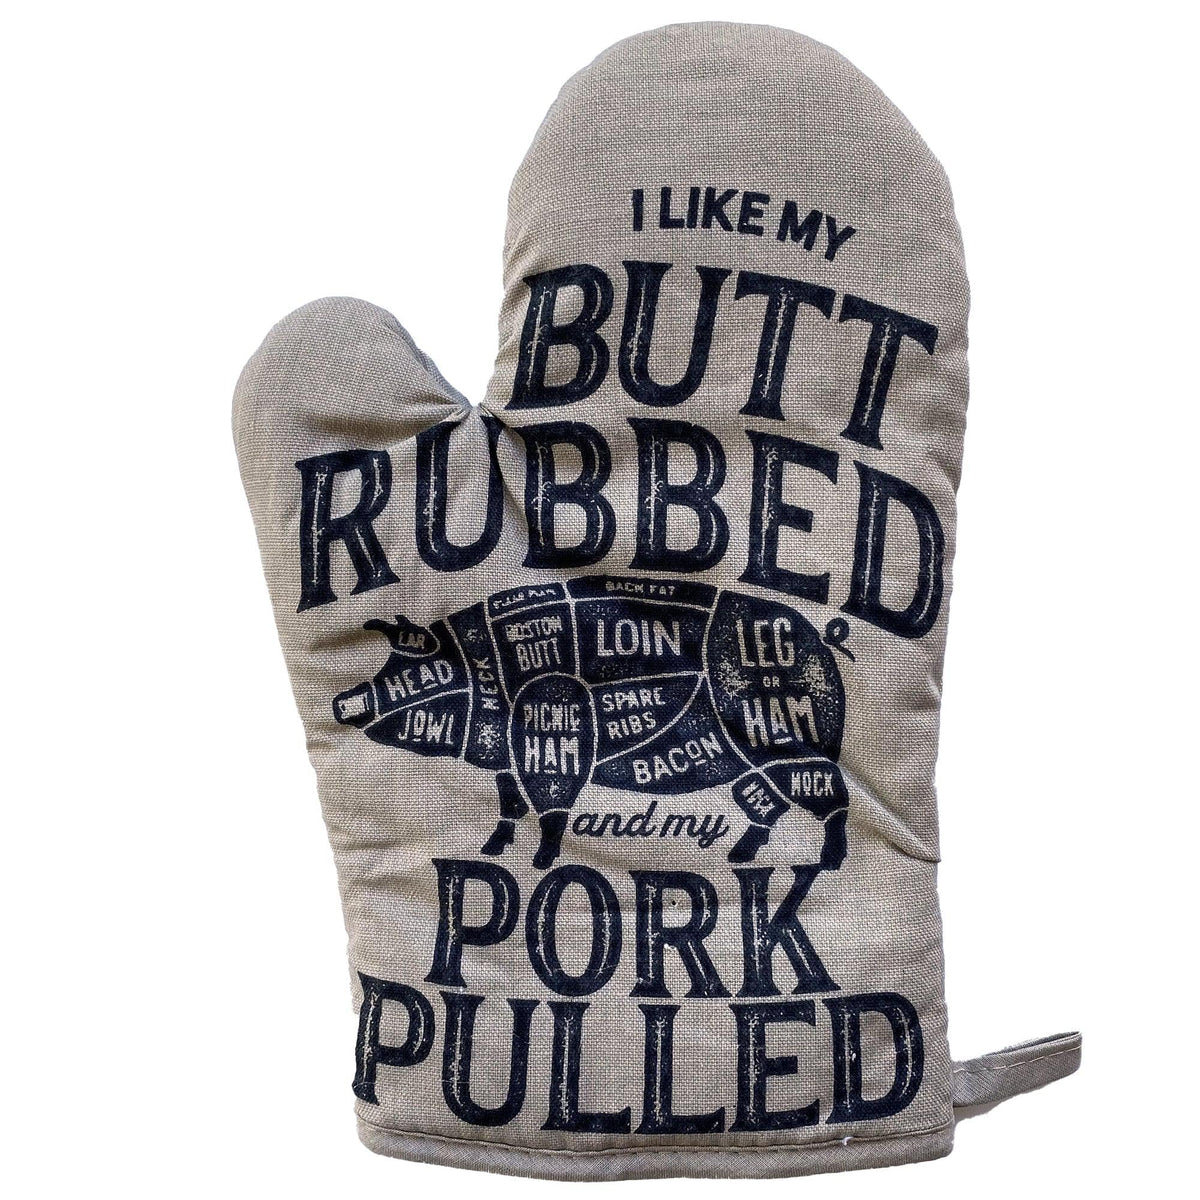 I Like My Butt Rubbed And My Pork Pulled  -  Crazy Dog T-Shirts